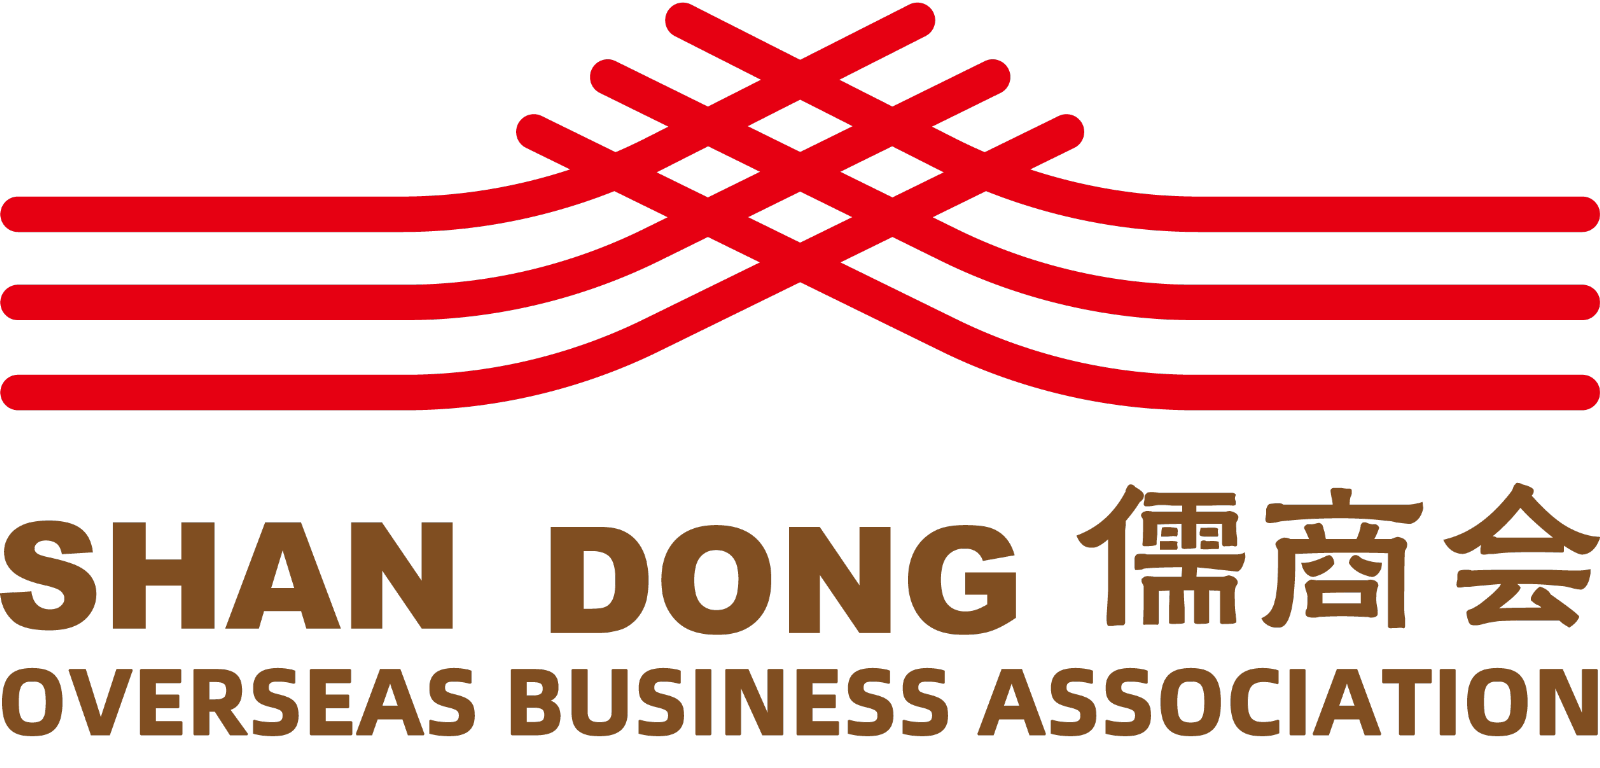 Shandong Overseas Business Association in Malaysia Introduction